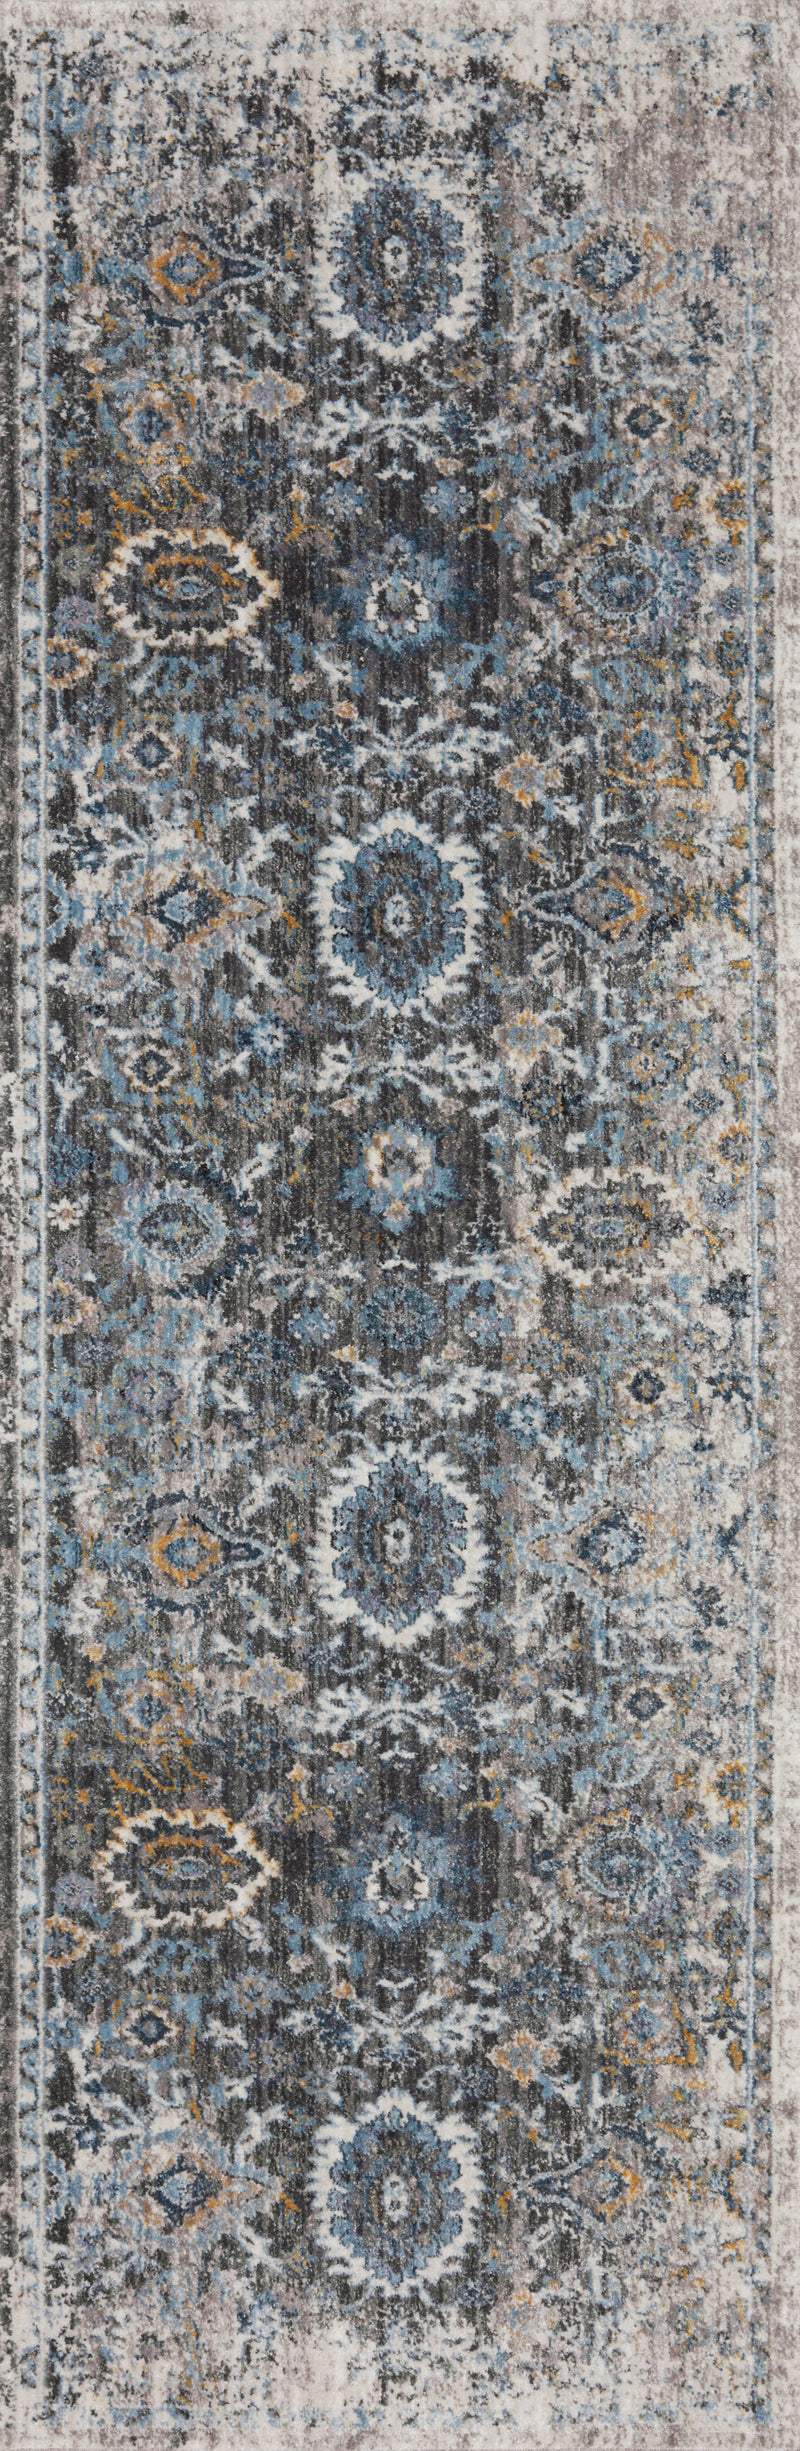 SAMRA Collection Rug  in  Grey / Multi Gray Accent Power-Loomed Polypropylene